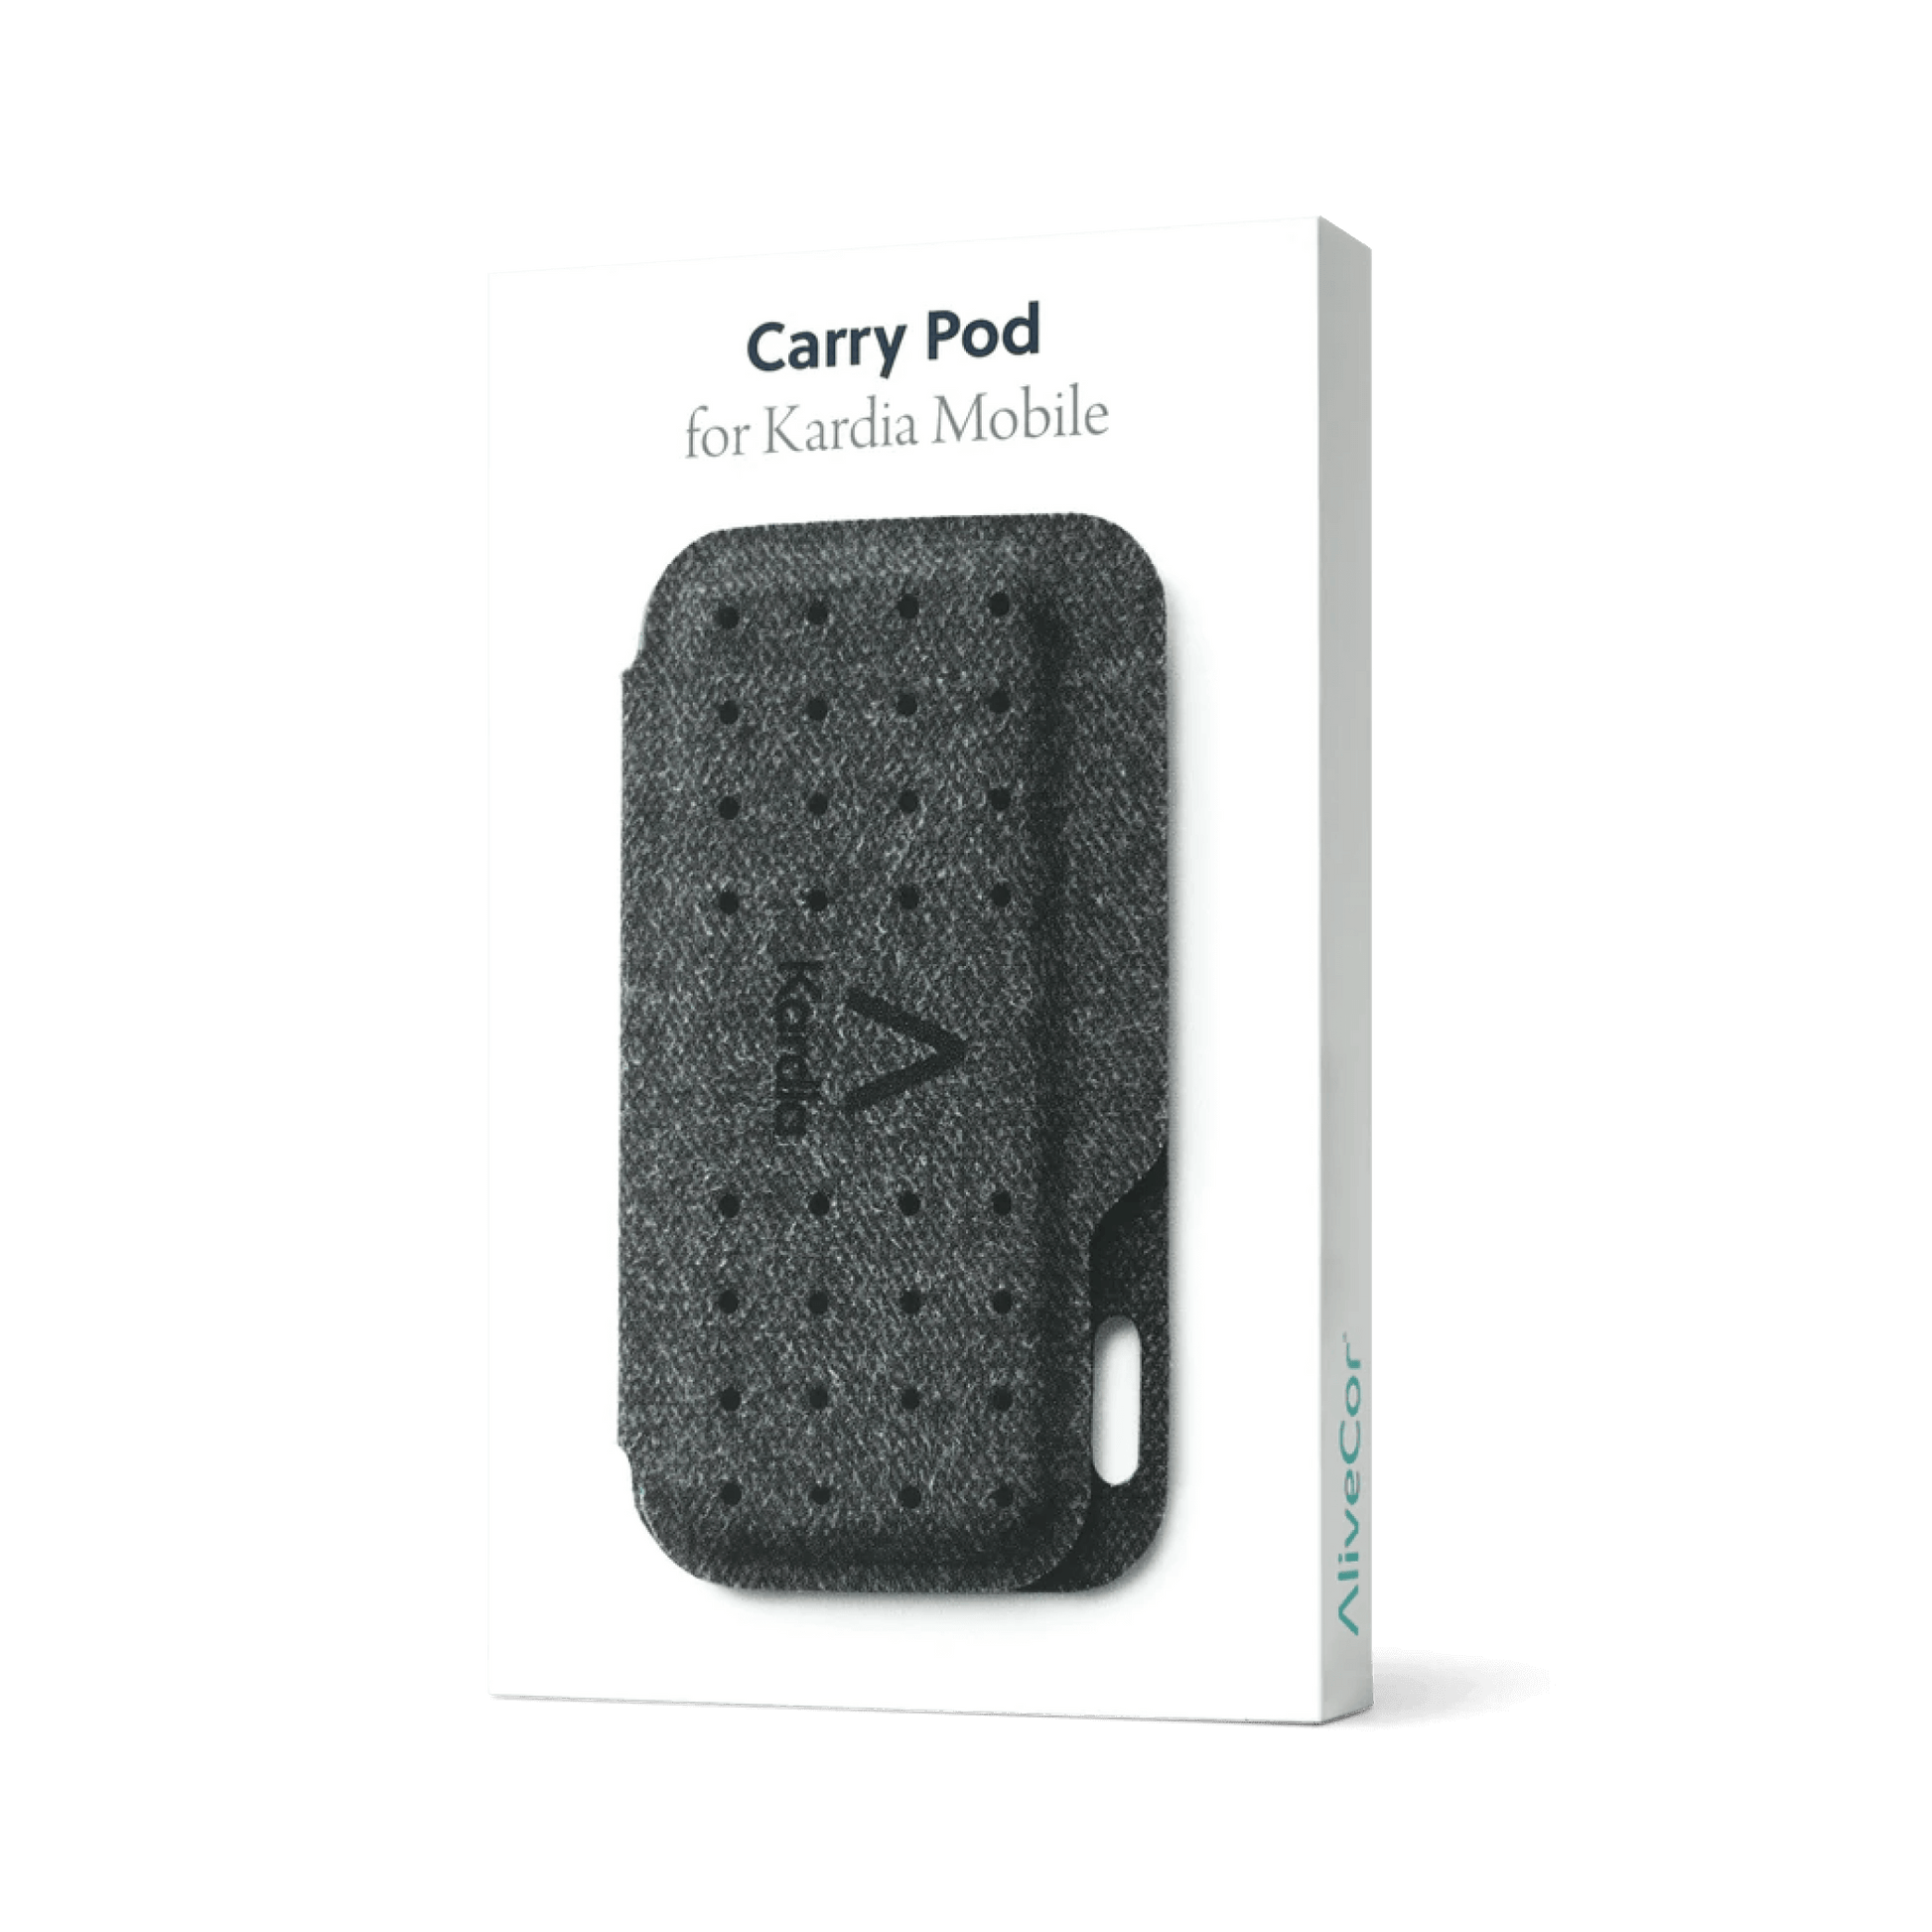 AliveCor® Kardia Mobile Case - Magnetic Closure for Keeping The Device -  Fits in Pockets or Purses or Attaches to Keyring Gray